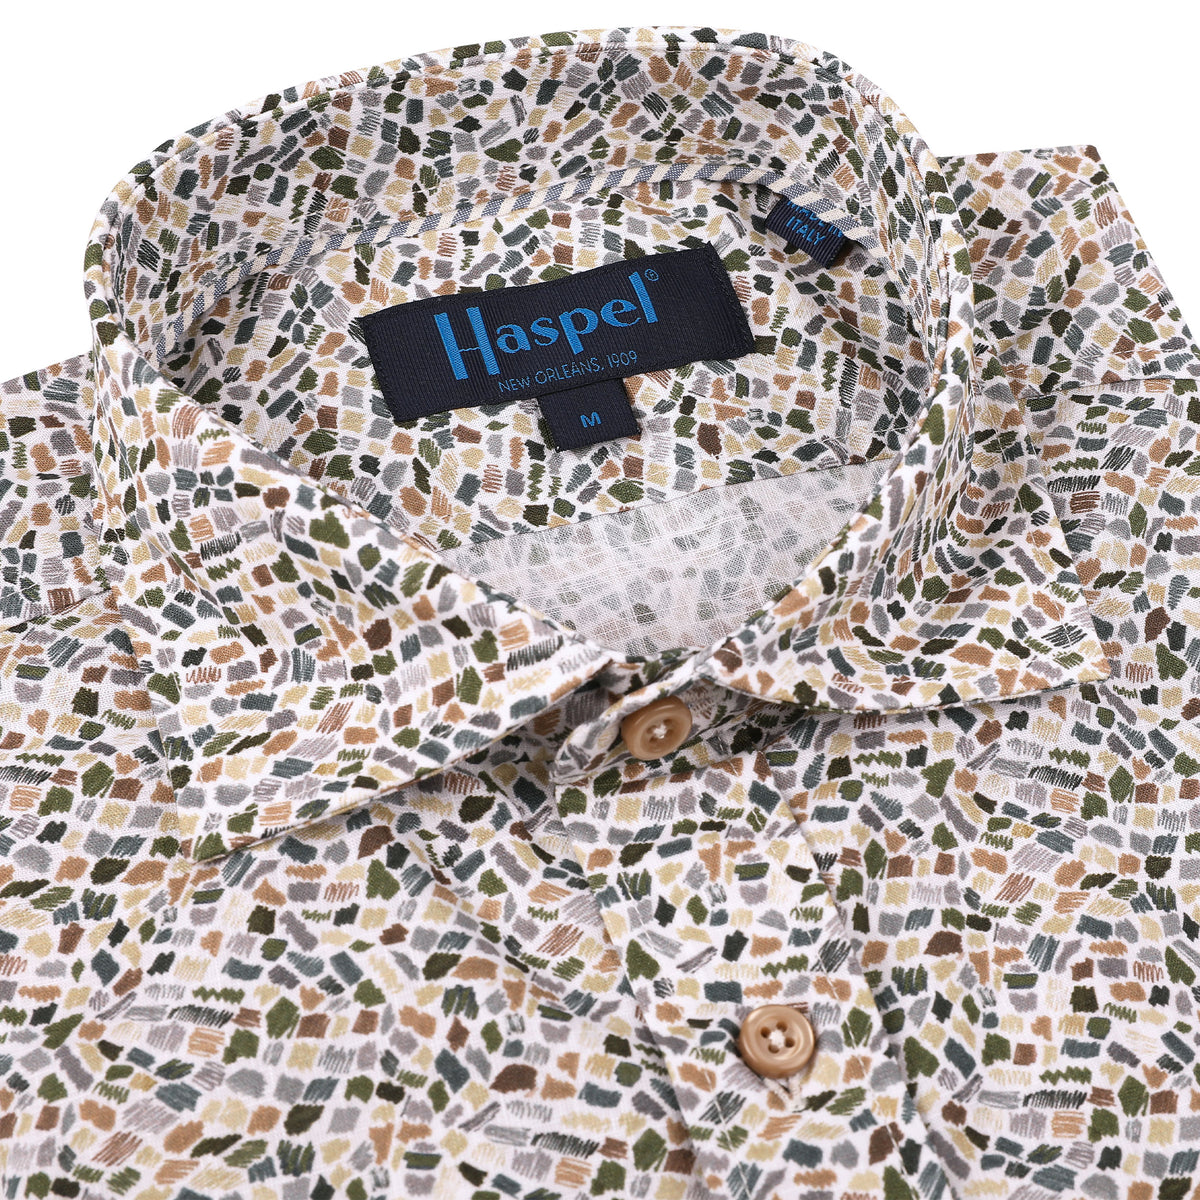 This striking Carroll Olive &amp; Tan Print adds a sophisticated touch to any wardrobe. The olive and tan mosaic print is offset with tan buttons to create an eye-catching look, perfect for a night in New Orleans or wherever your good times take you!  100% Cotton • Spread Collar • Long Sleeve • Machine Washable • Made in Italy • Return Policy